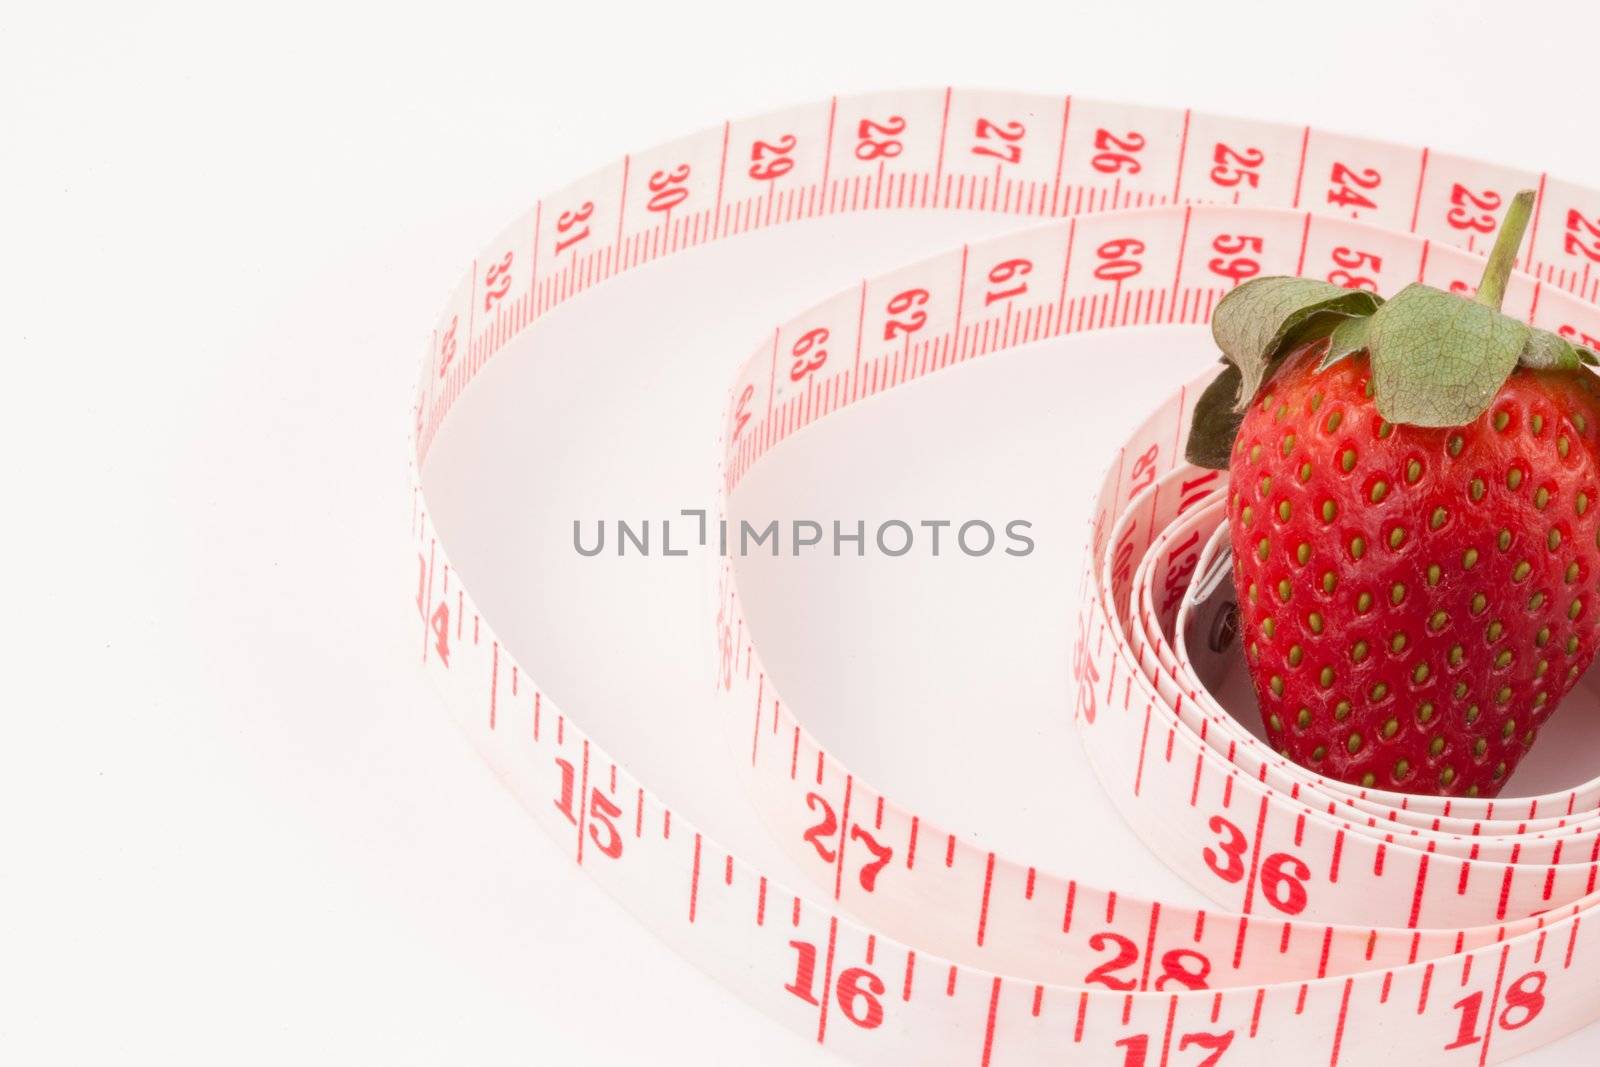 Close up of a strawberry surrounded by a ruler against a white background